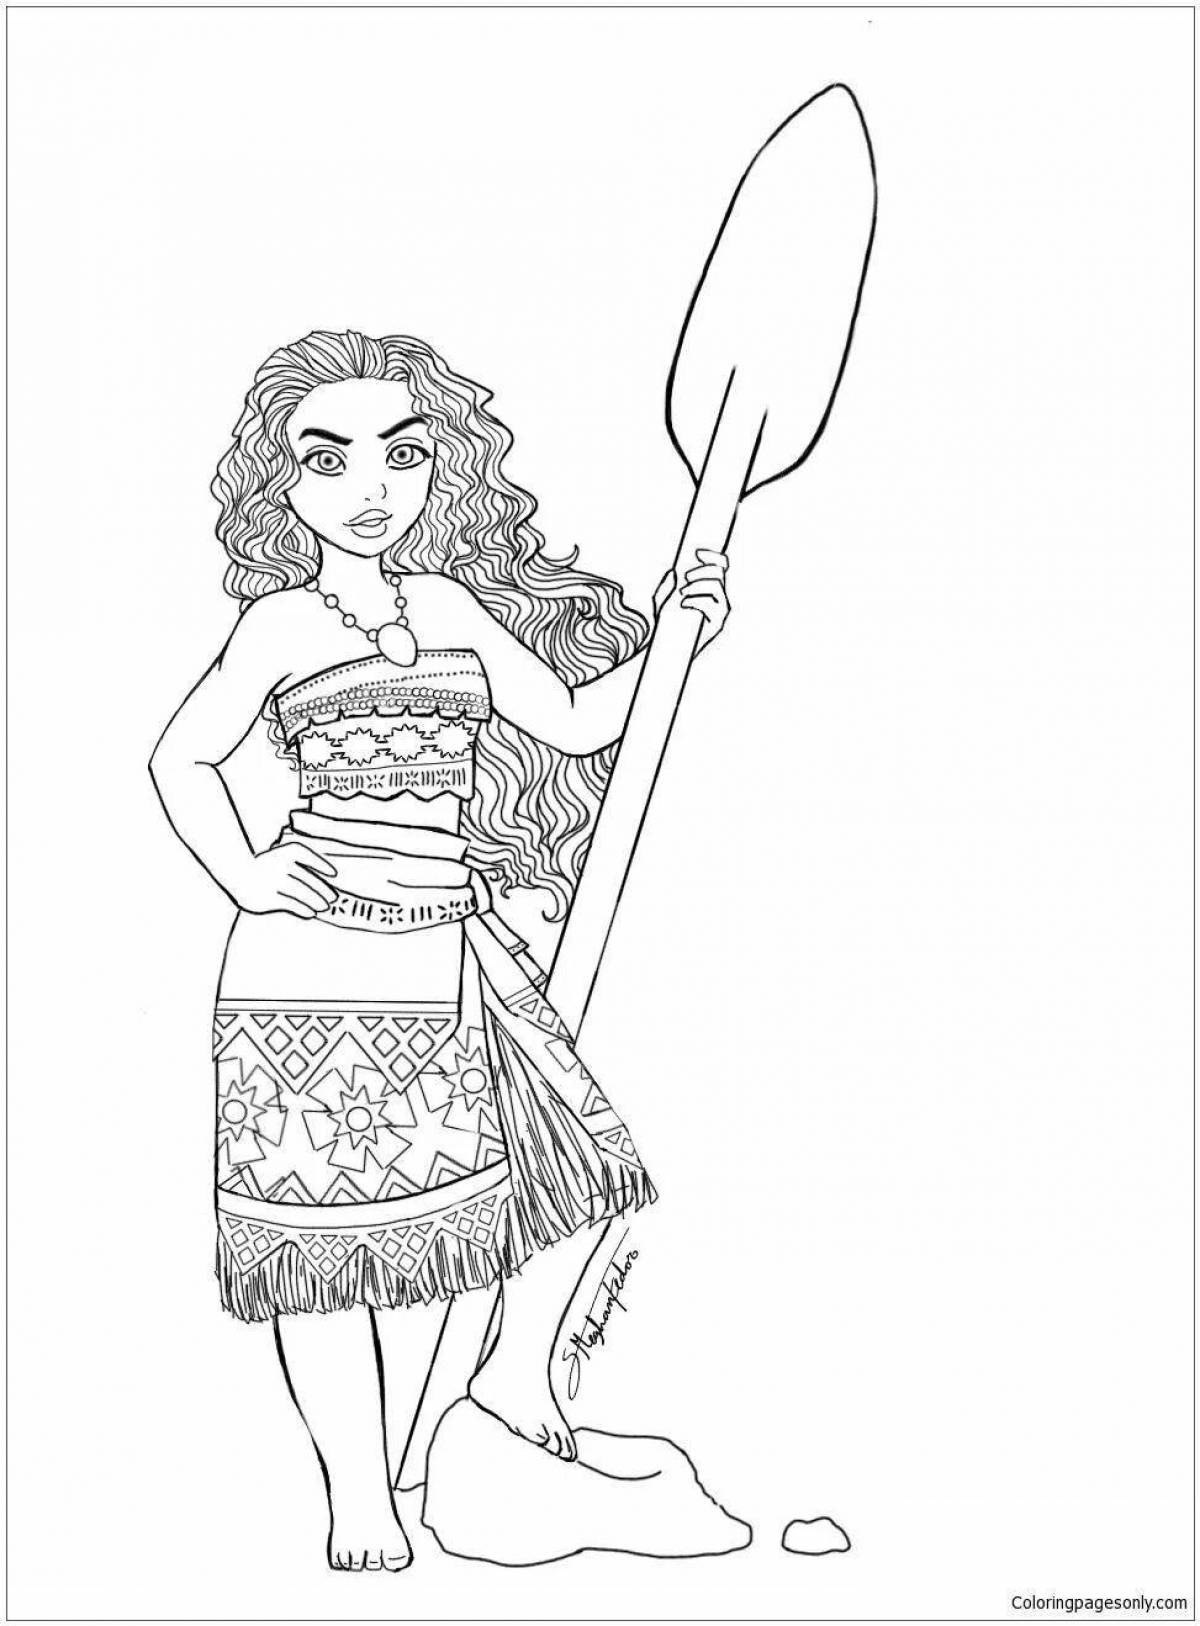 Moana mystical coloring book for girls